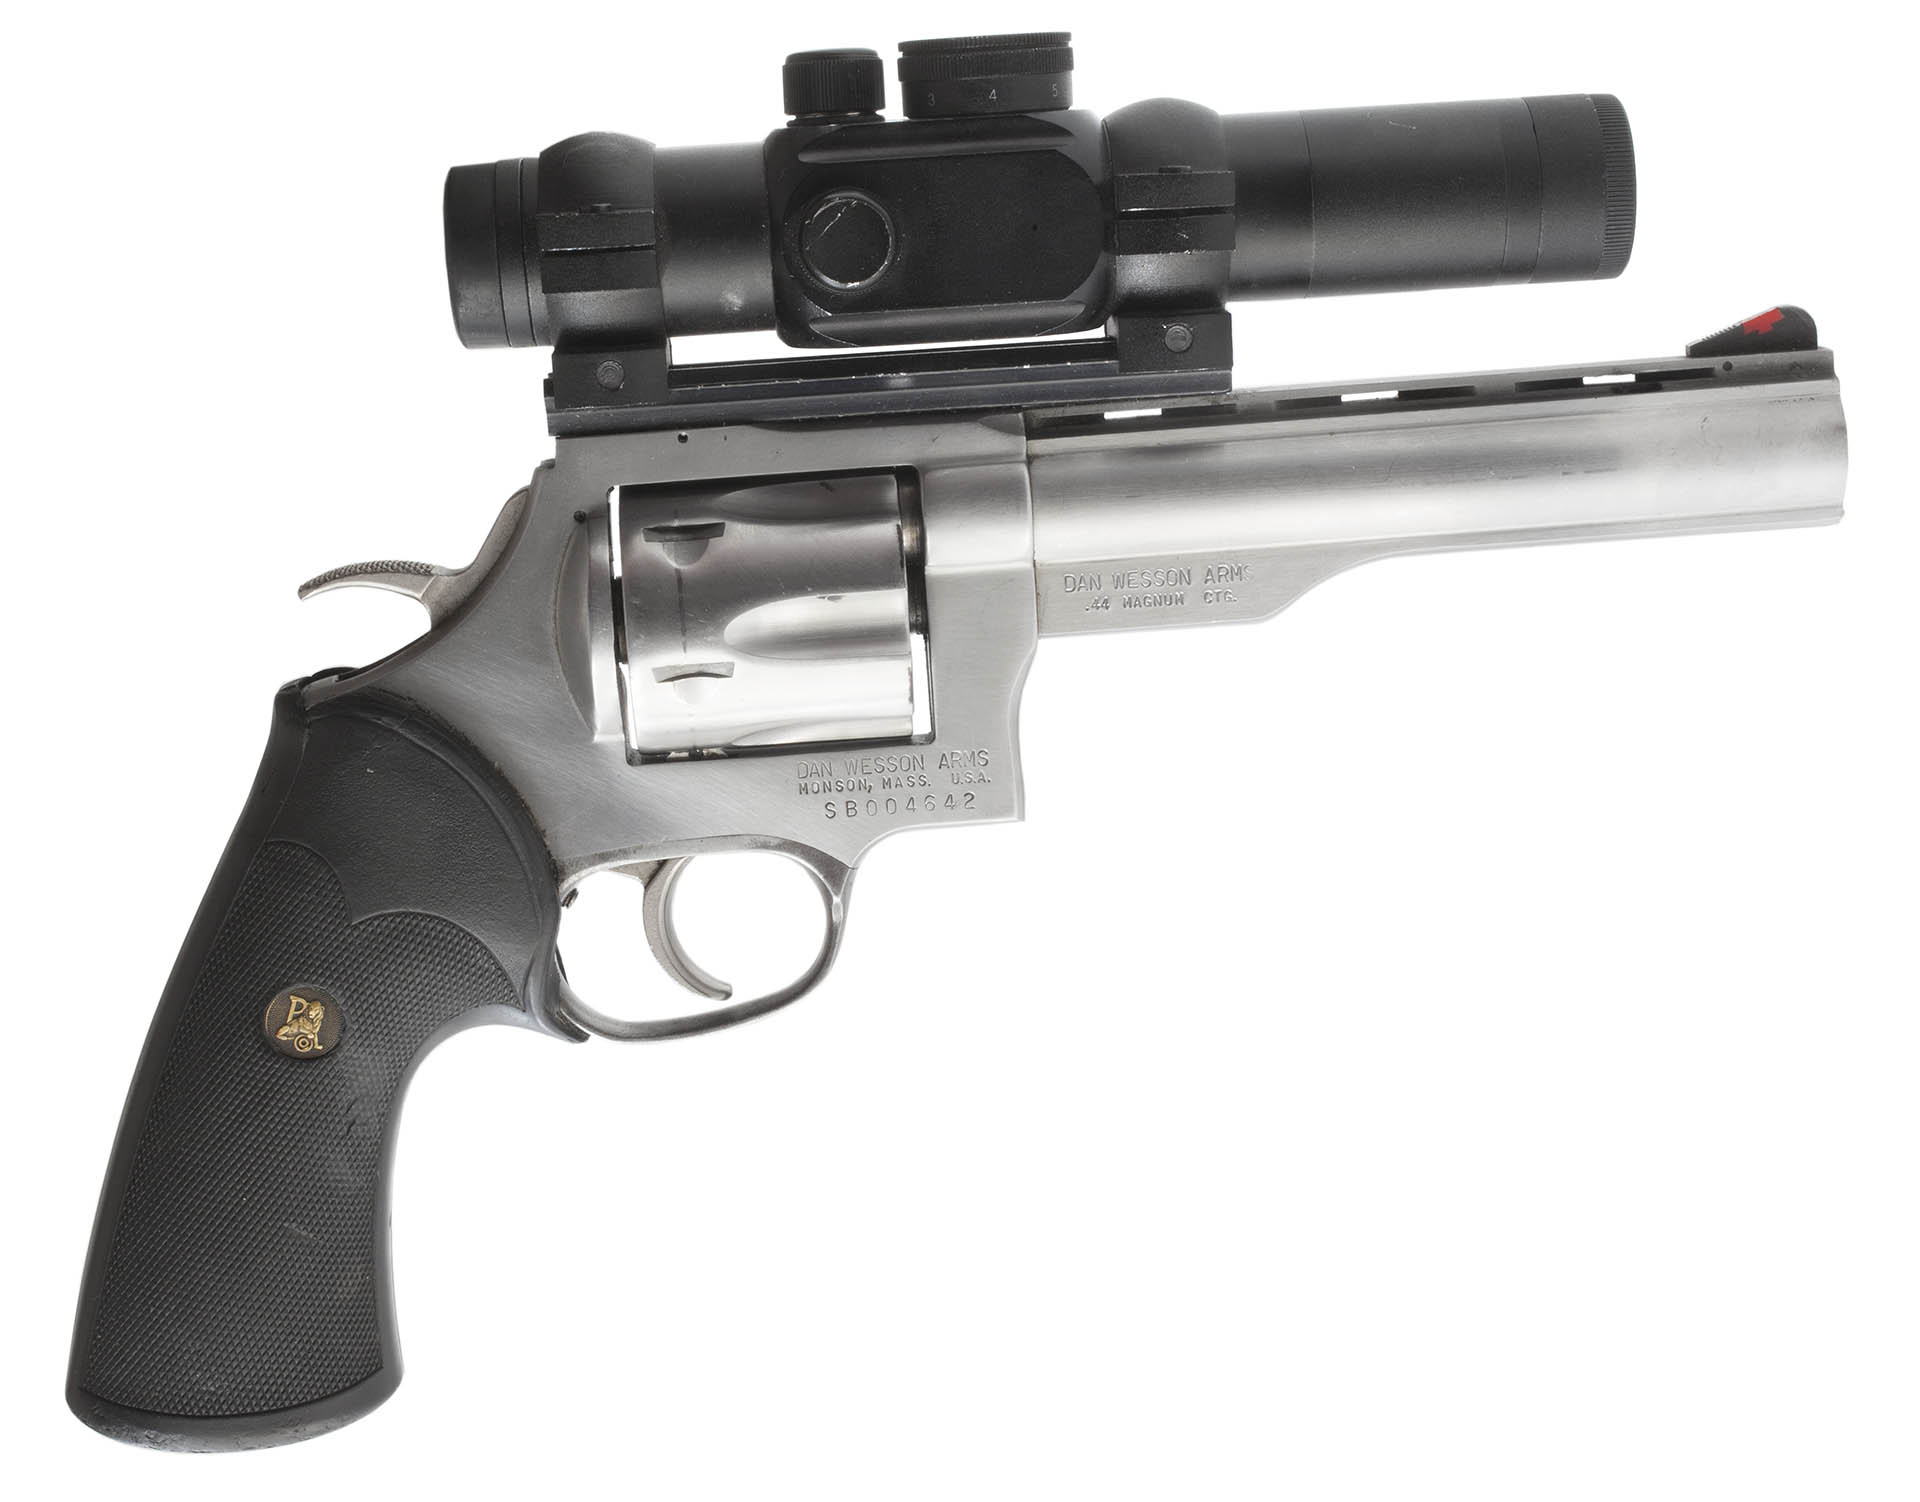 Sometime around 1990, the author had his pet Dan Wesson revolver fitted for hunting with a “cutting edge” red dot, according to the gunsmith who performed the work. It works flawlessly to this day, although it’s about five times longer than today’s higher performance versions.